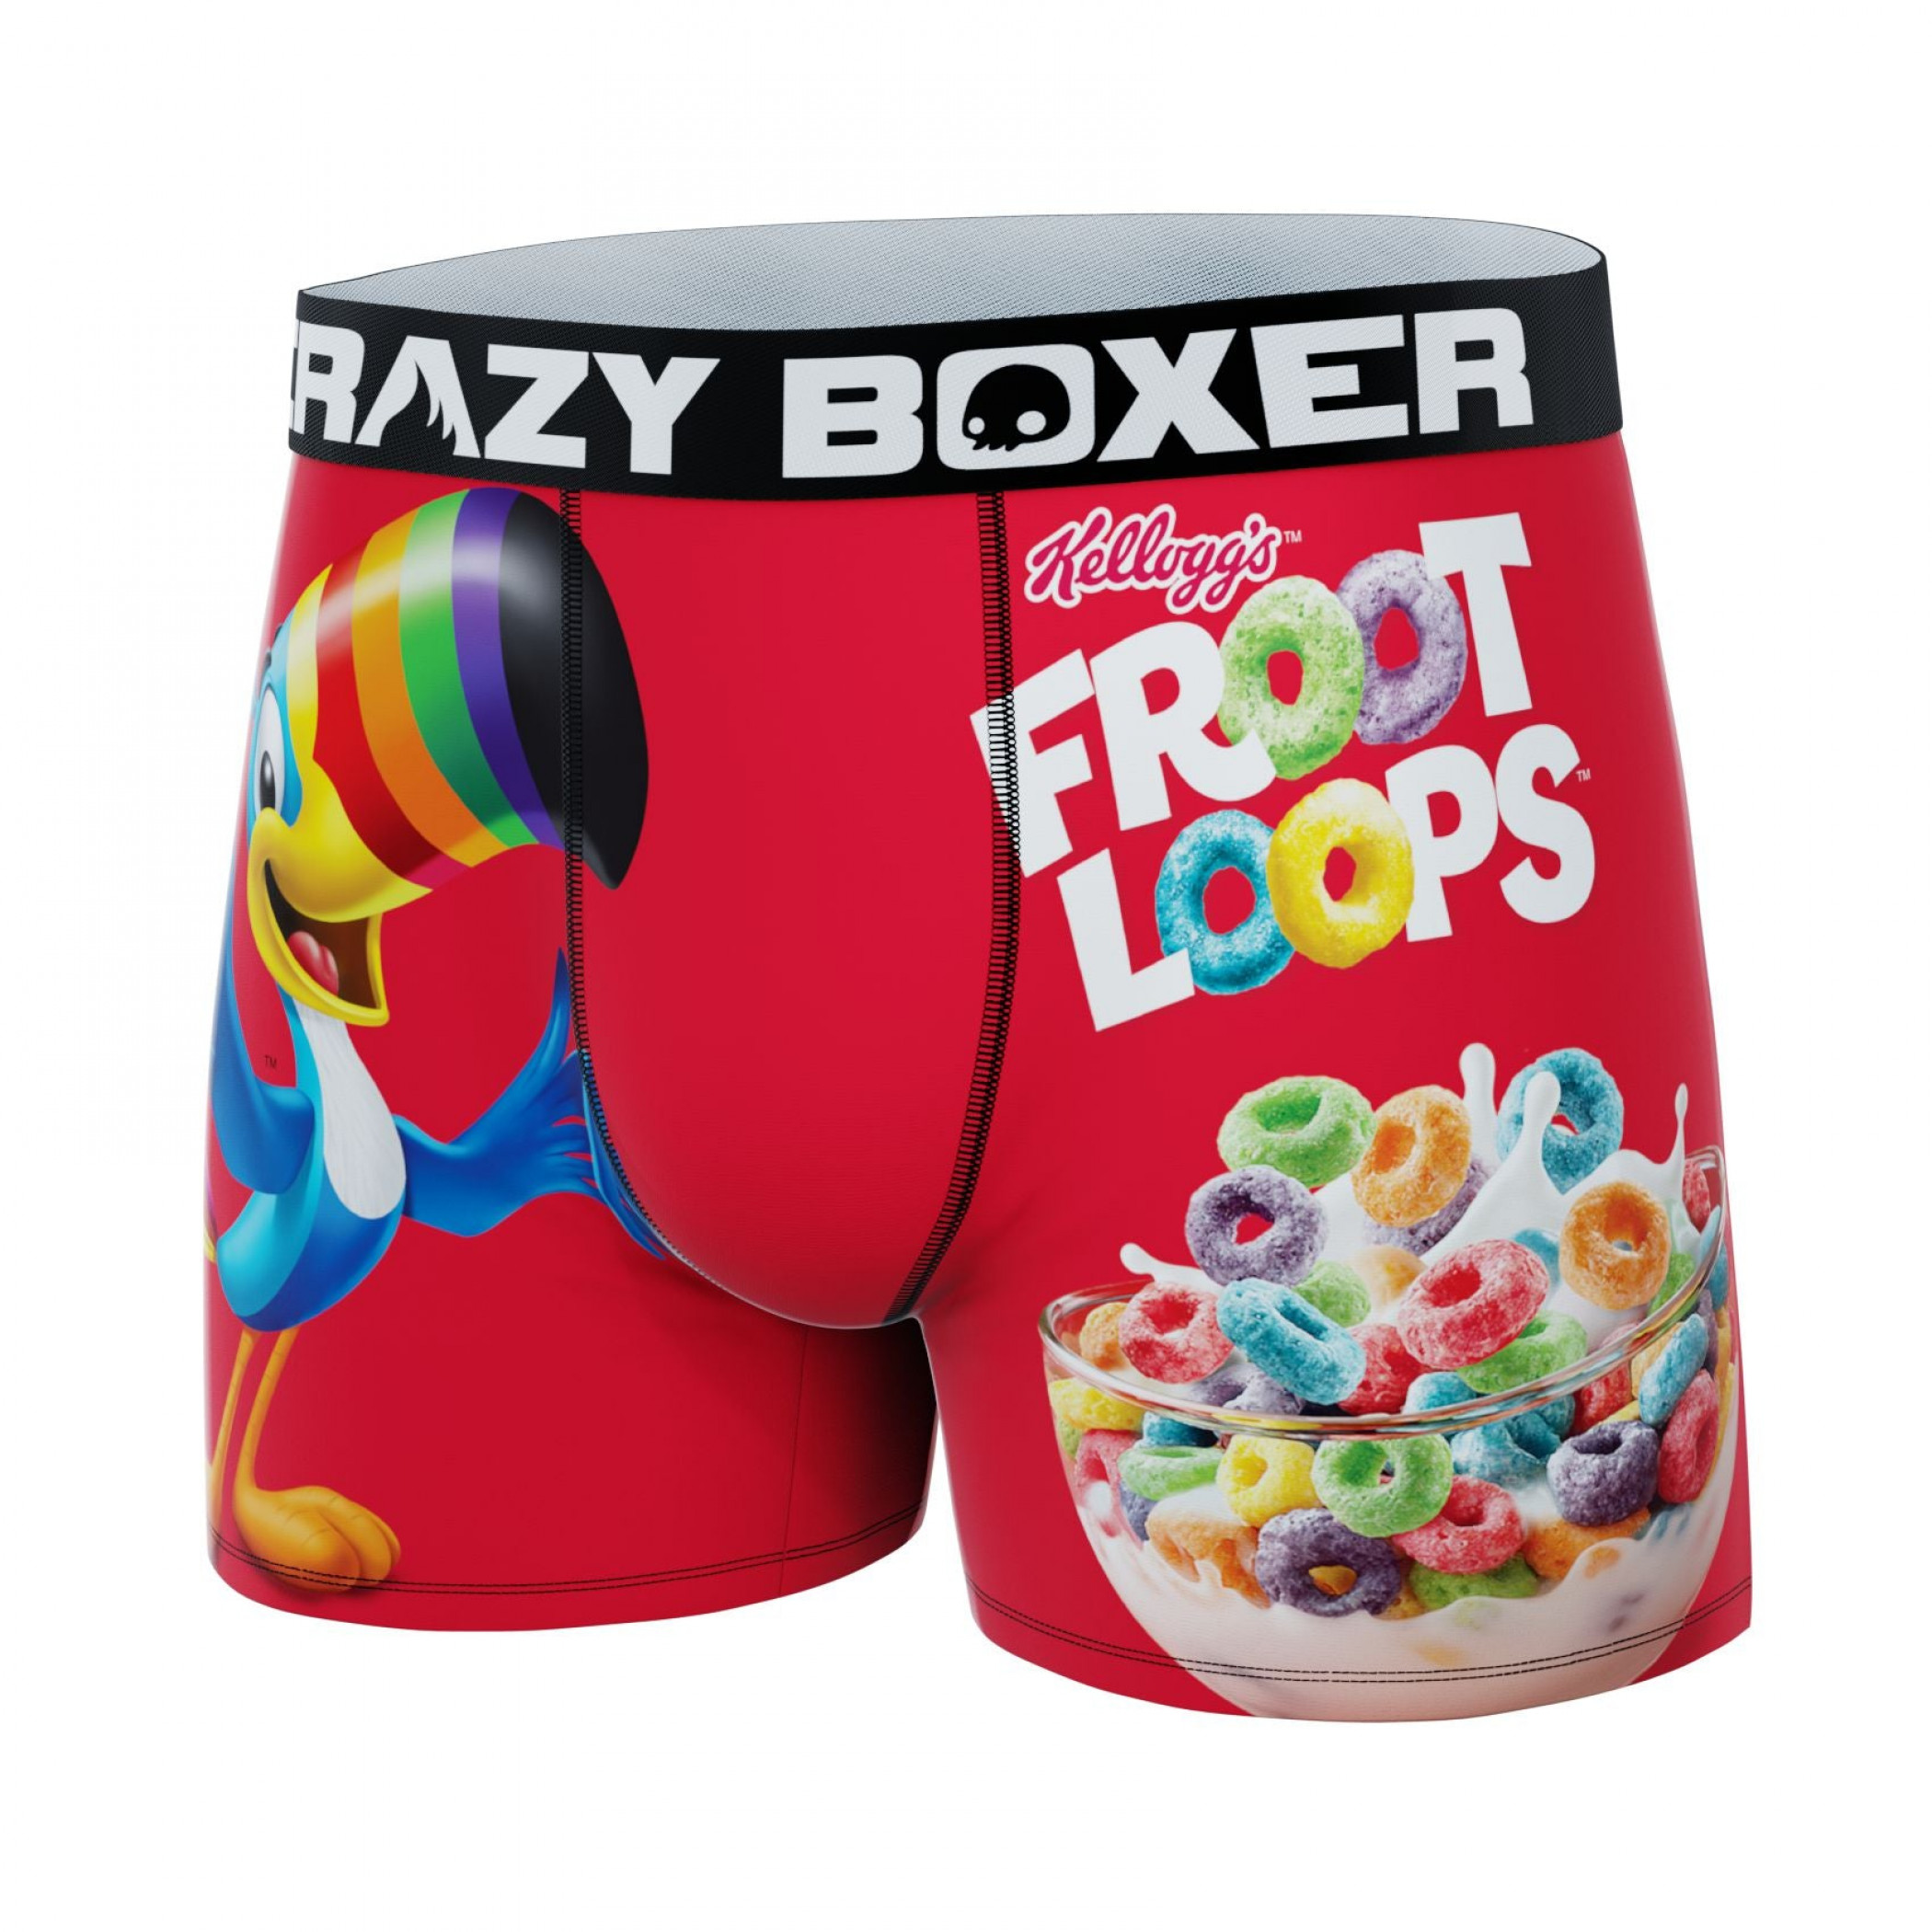 Slips boxer homme Crazy Boxer Kellogg's Froot Loops rouge